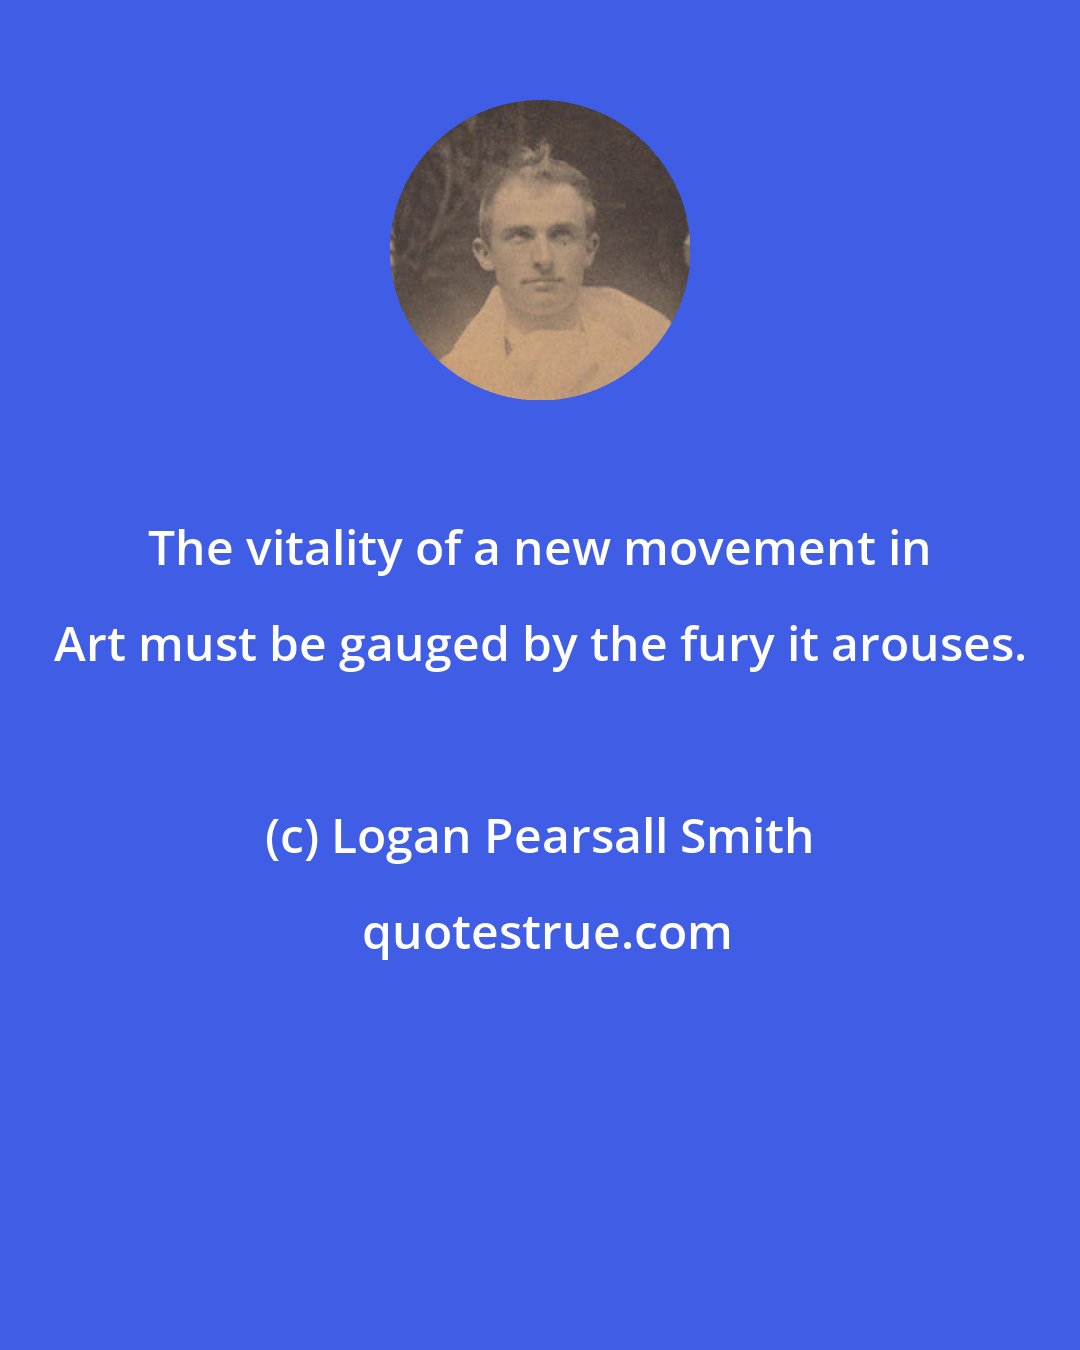 Logan Pearsall Smith: The vitality of a new movement in Art must be gauged by the fury it arouses.